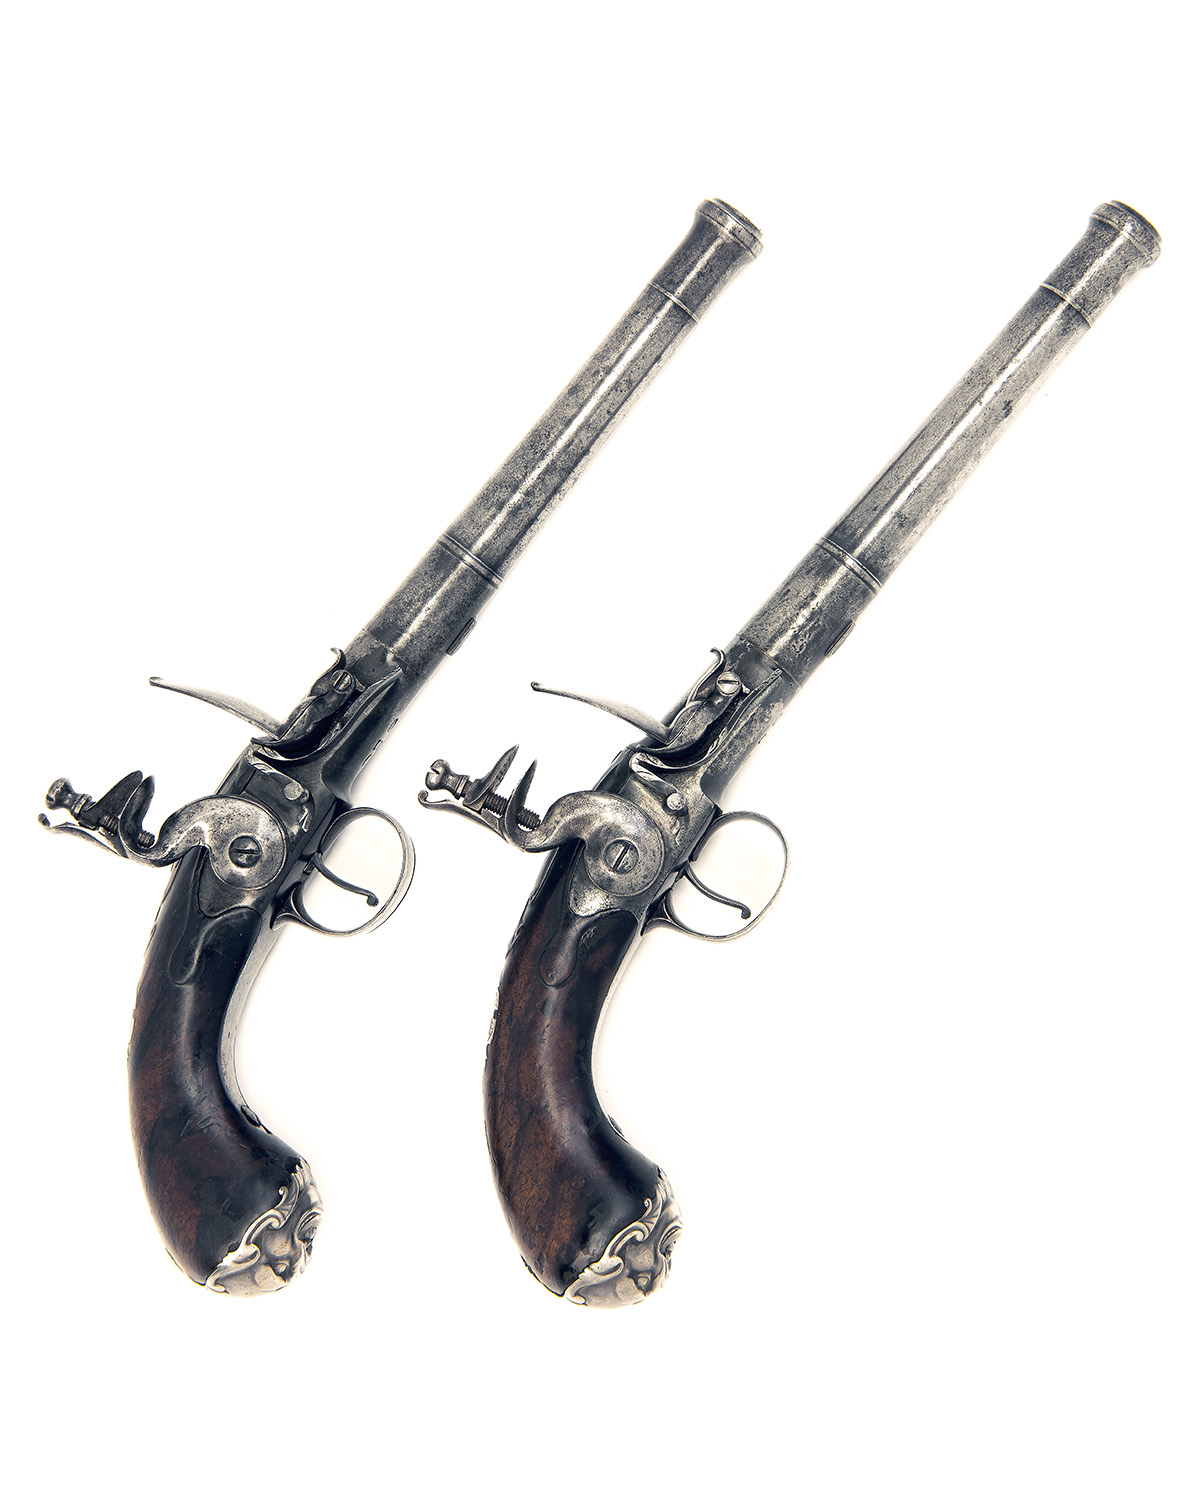 DREW, LONDON A PAIR OF 18-BORE FLINTLOCK PISTOLS, MODEL 'QUEEN ANNE TYPE', no visible serial number,